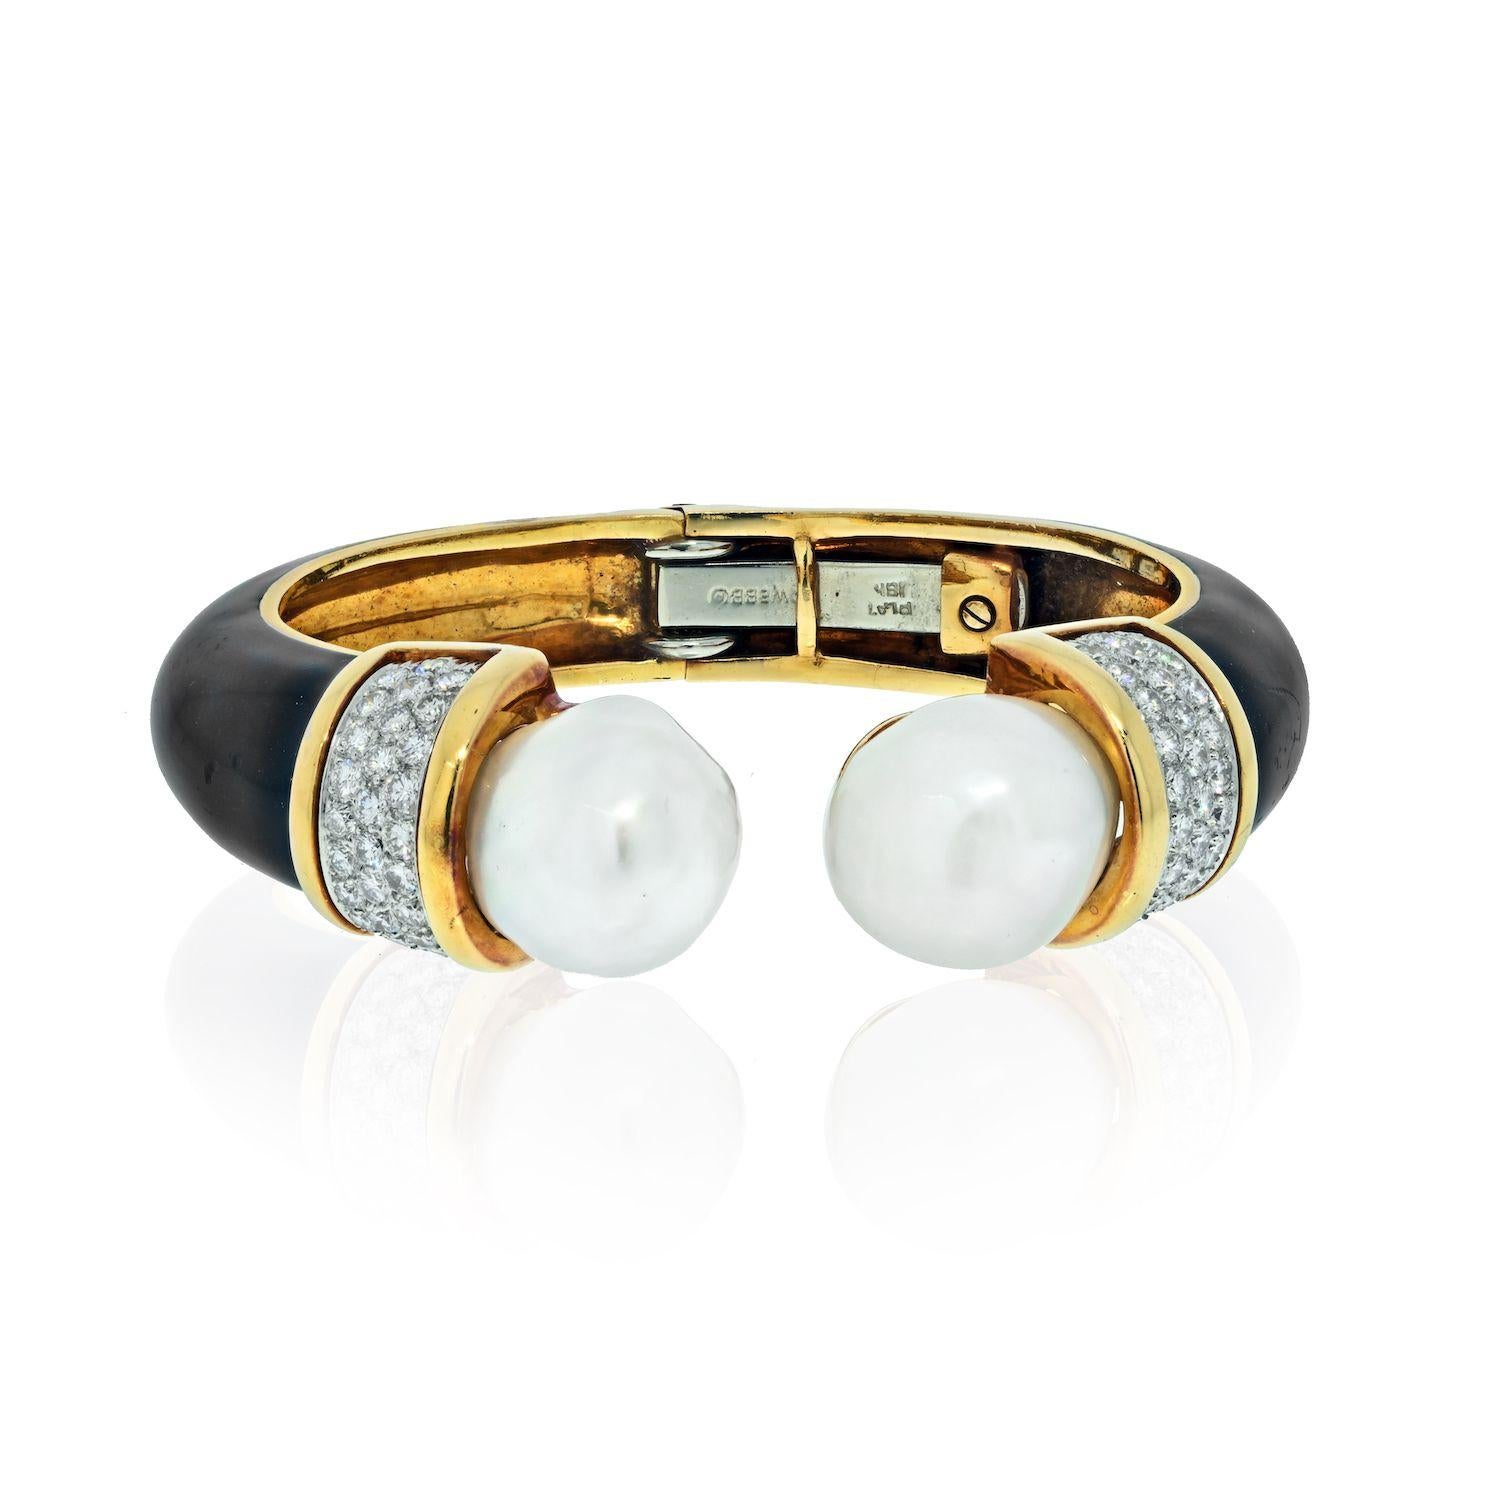 David Webb Platinum & 18K Yellow Gold Black Enamel and Pearl Diamond Bracelet In Excellent Condition For Sale In New York, NY